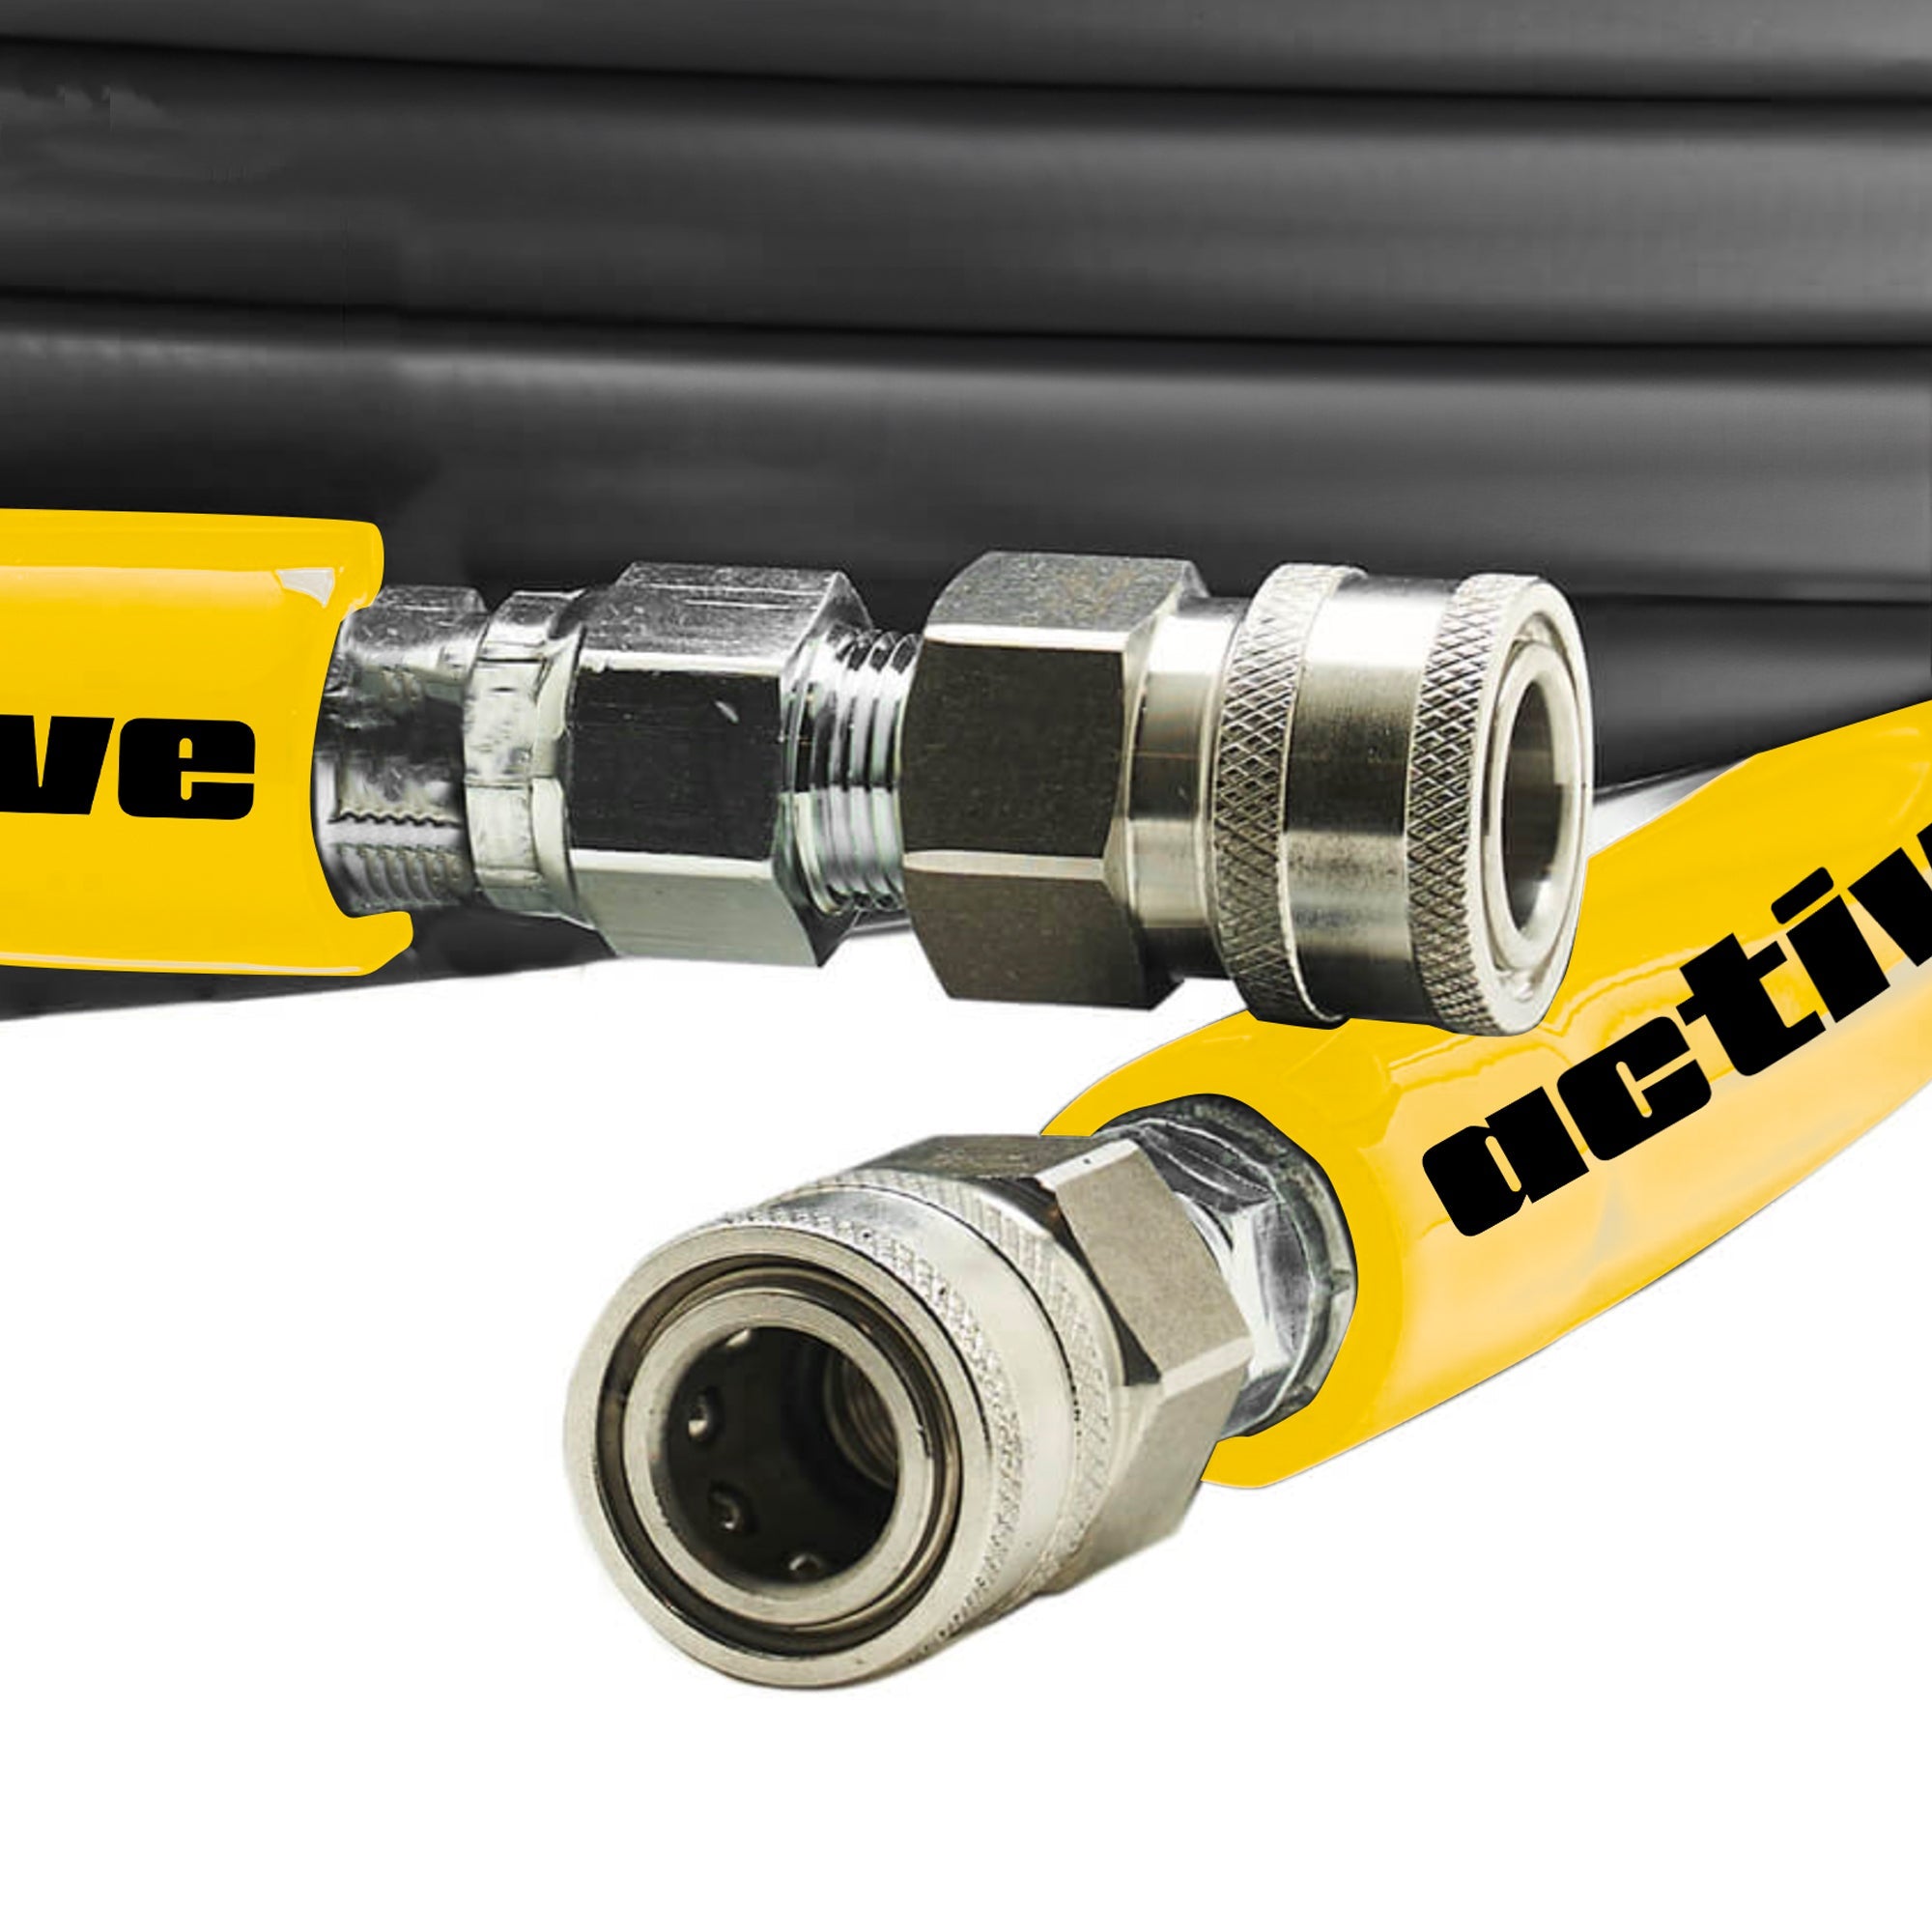 Close-up view of two Active™ 50’ Pressure Washer Extension Hoses with steel braided construction and metal connectors on a grey background.